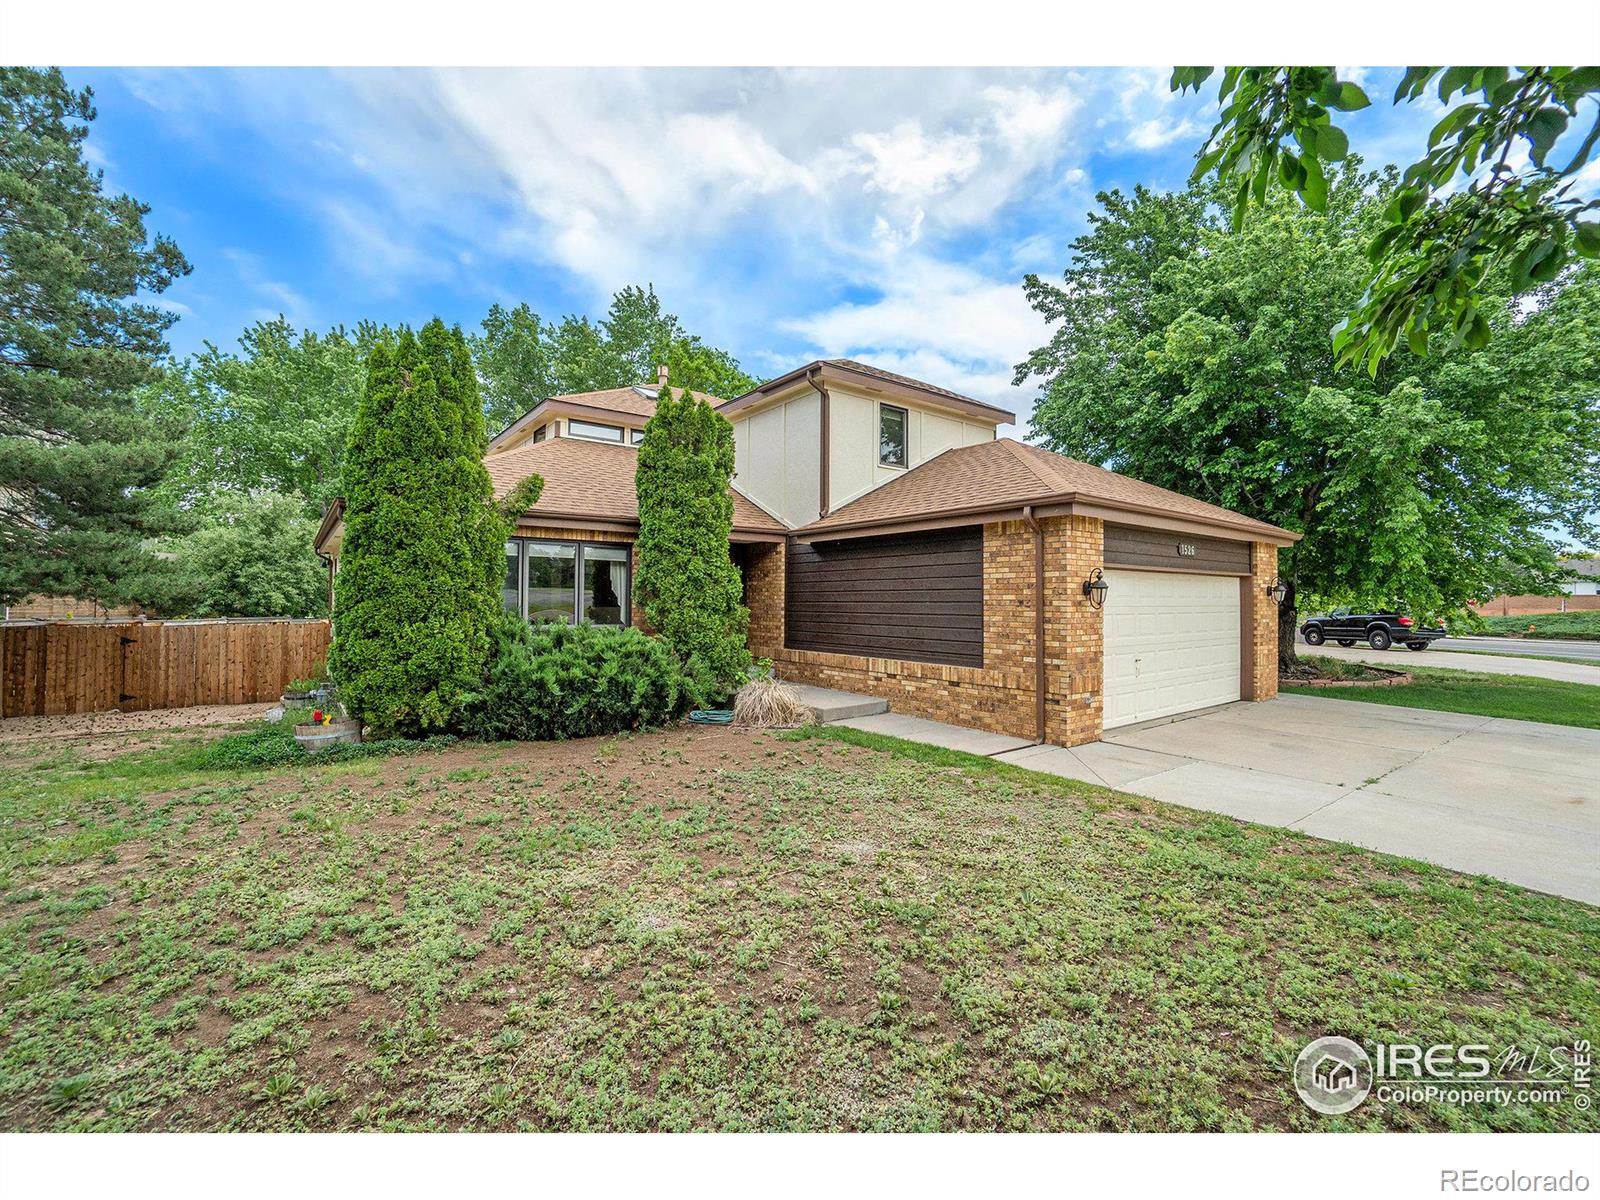 1526  43rd Avenue, greeley MLS: 4567891010711 Beds: 6 Baths: 4 Price: $595,000